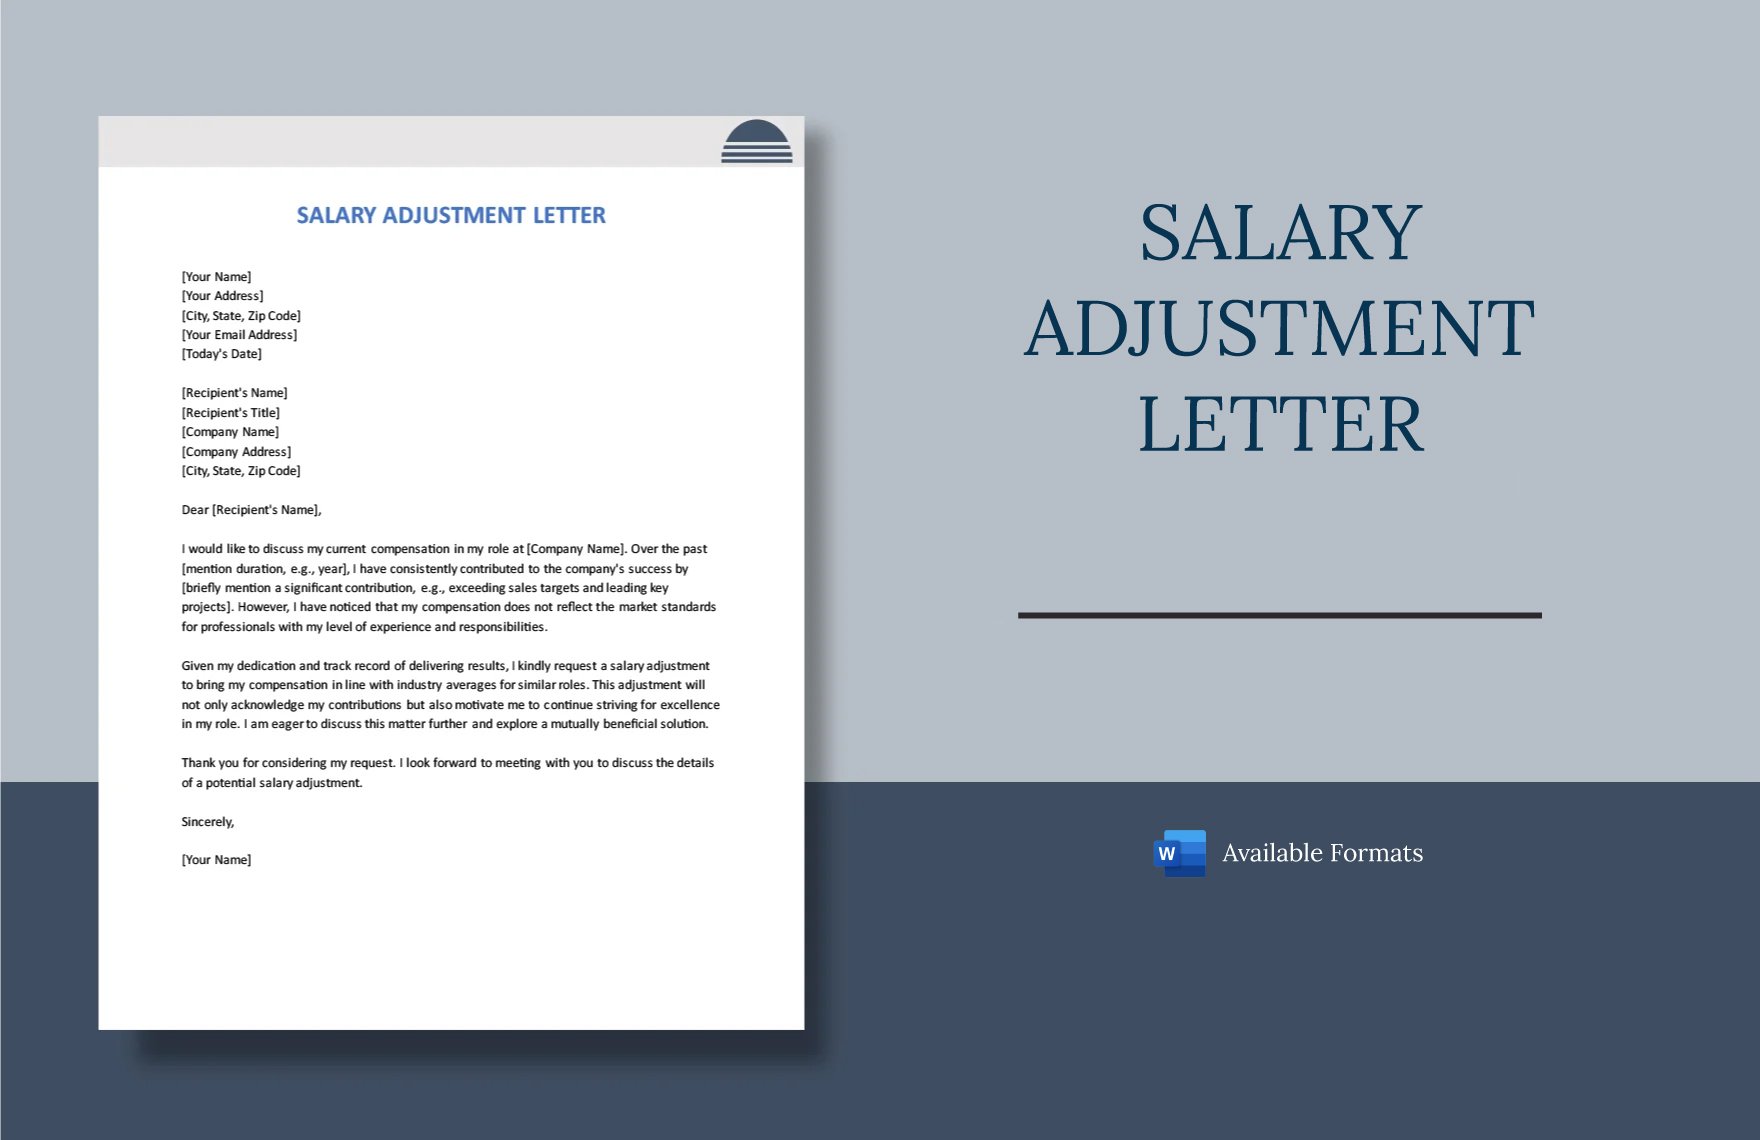 Salary Adjustment Letter in Word